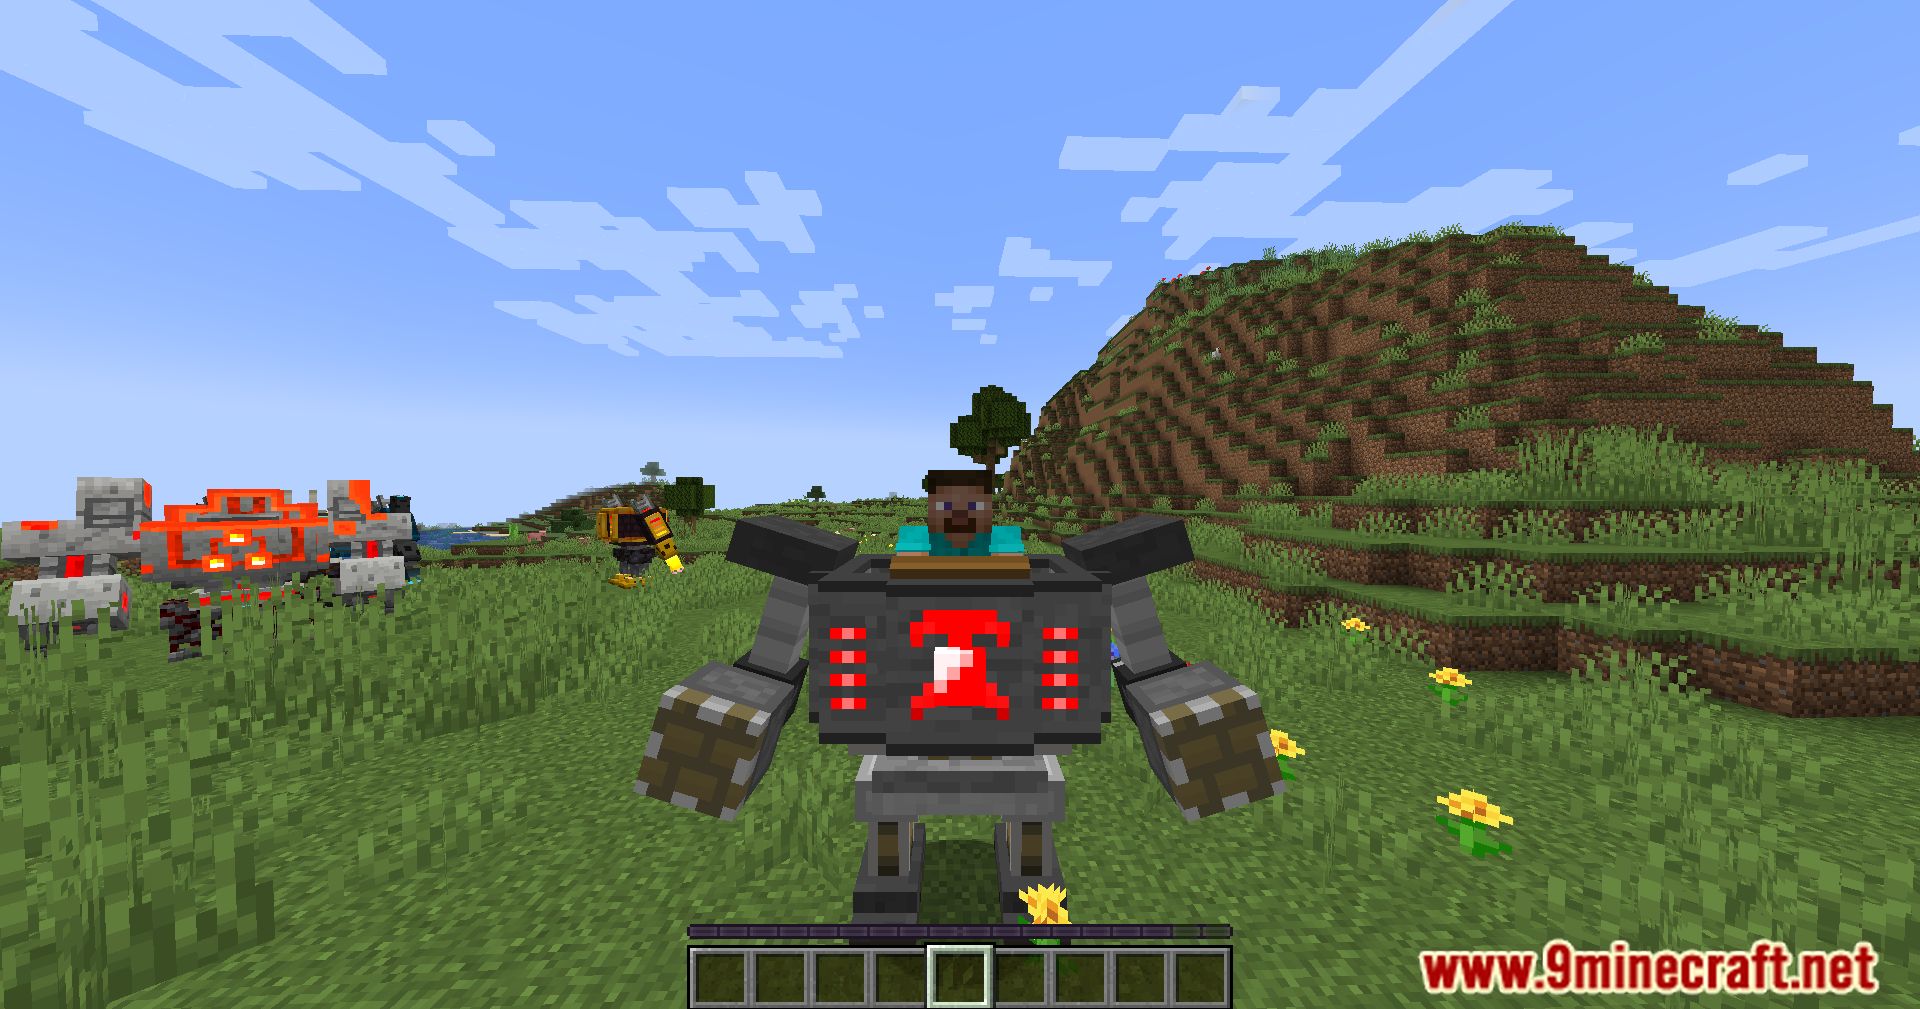 Armored Redstone Mod (1.20.1, 1.19.3) - Forge Your Path With Redstone-Powered Adventures! 7